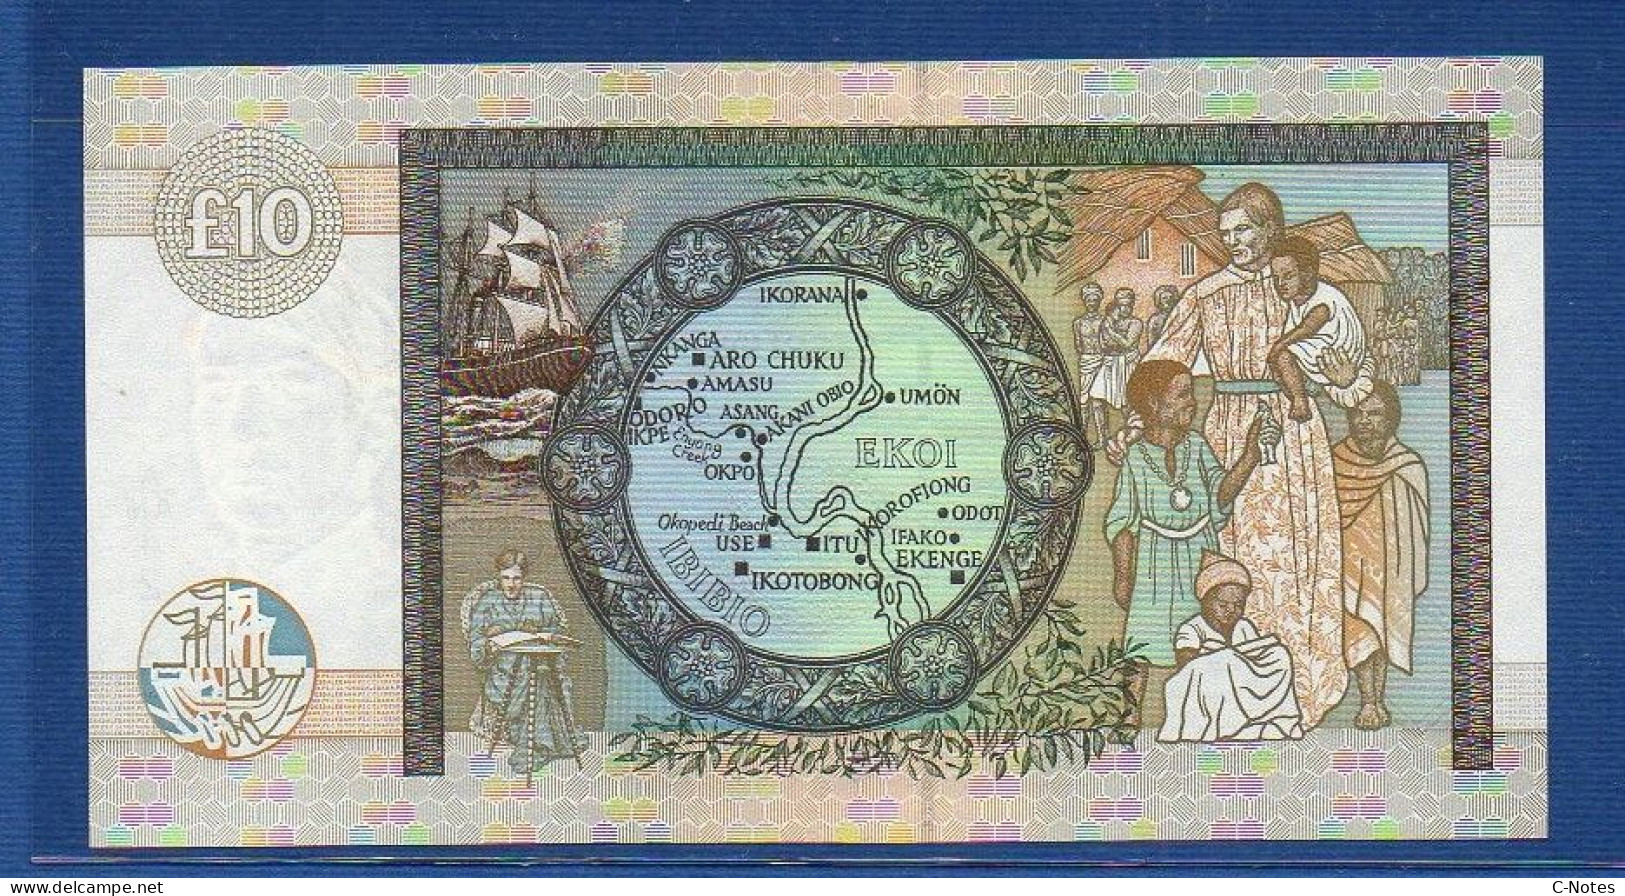 SCOTLAND - P.226b – 10 POUNDS 05.11.1998 UNC-, S/n A/AM 423570  "Work Of Mary Slesser" Commemorative Issue - 10 Ponden